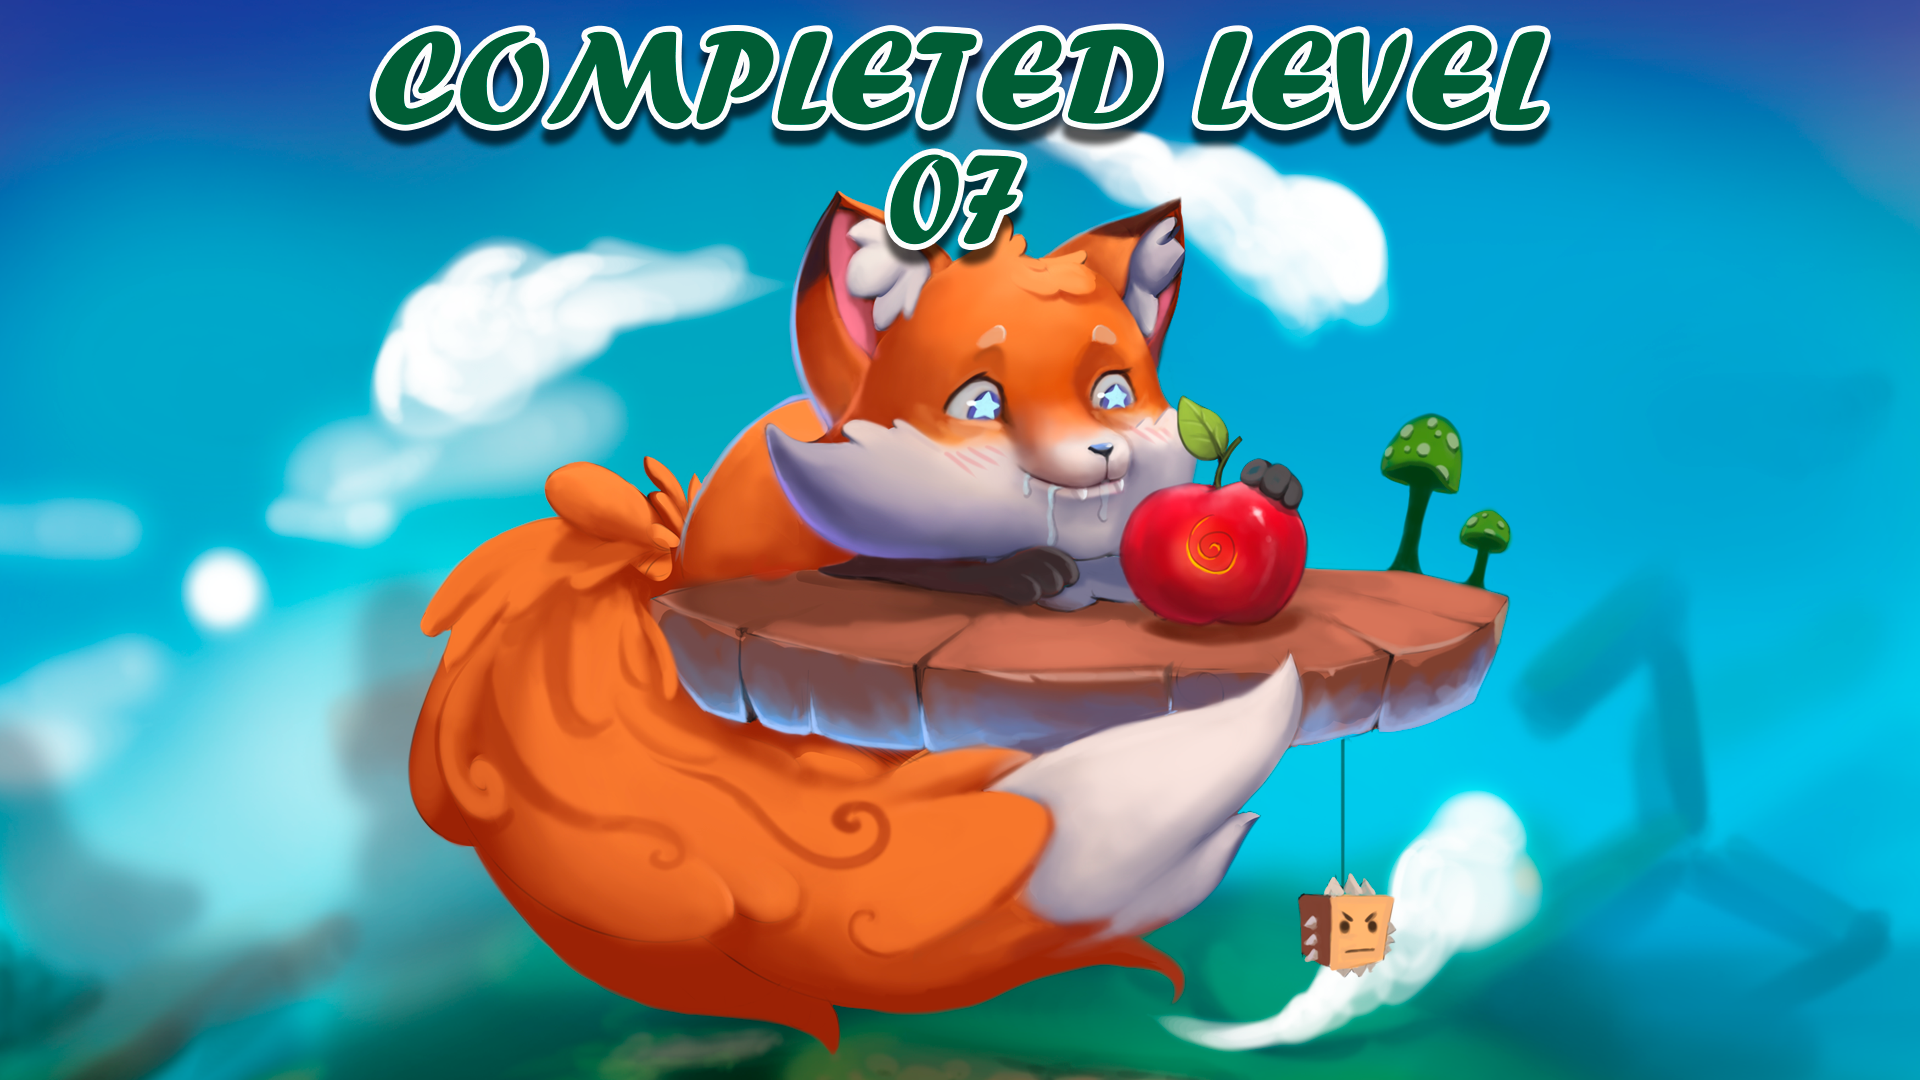 7 levels completed